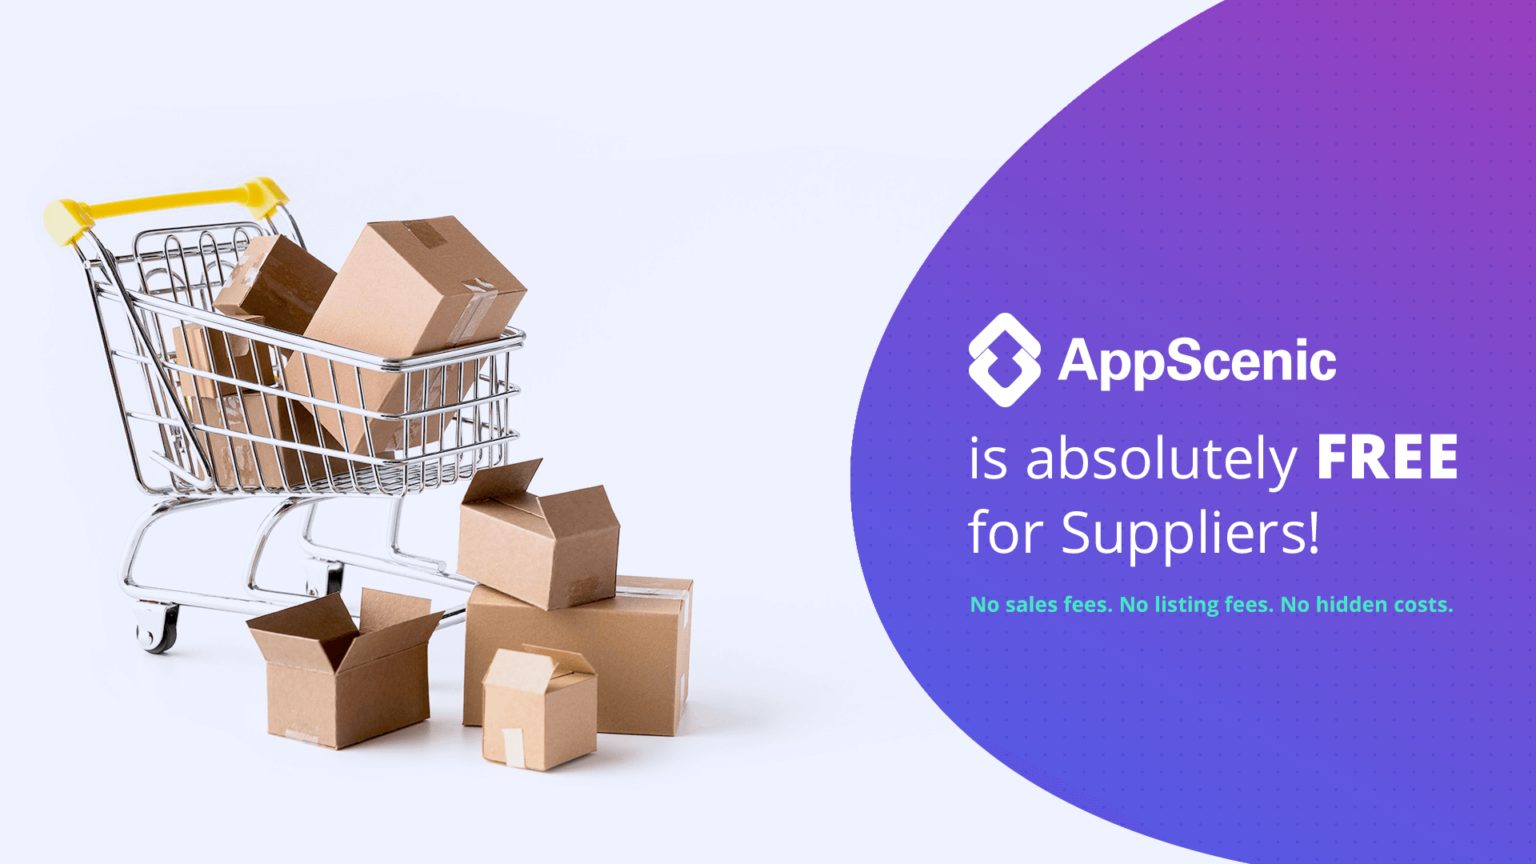 AppScenic is free for suppliers -  